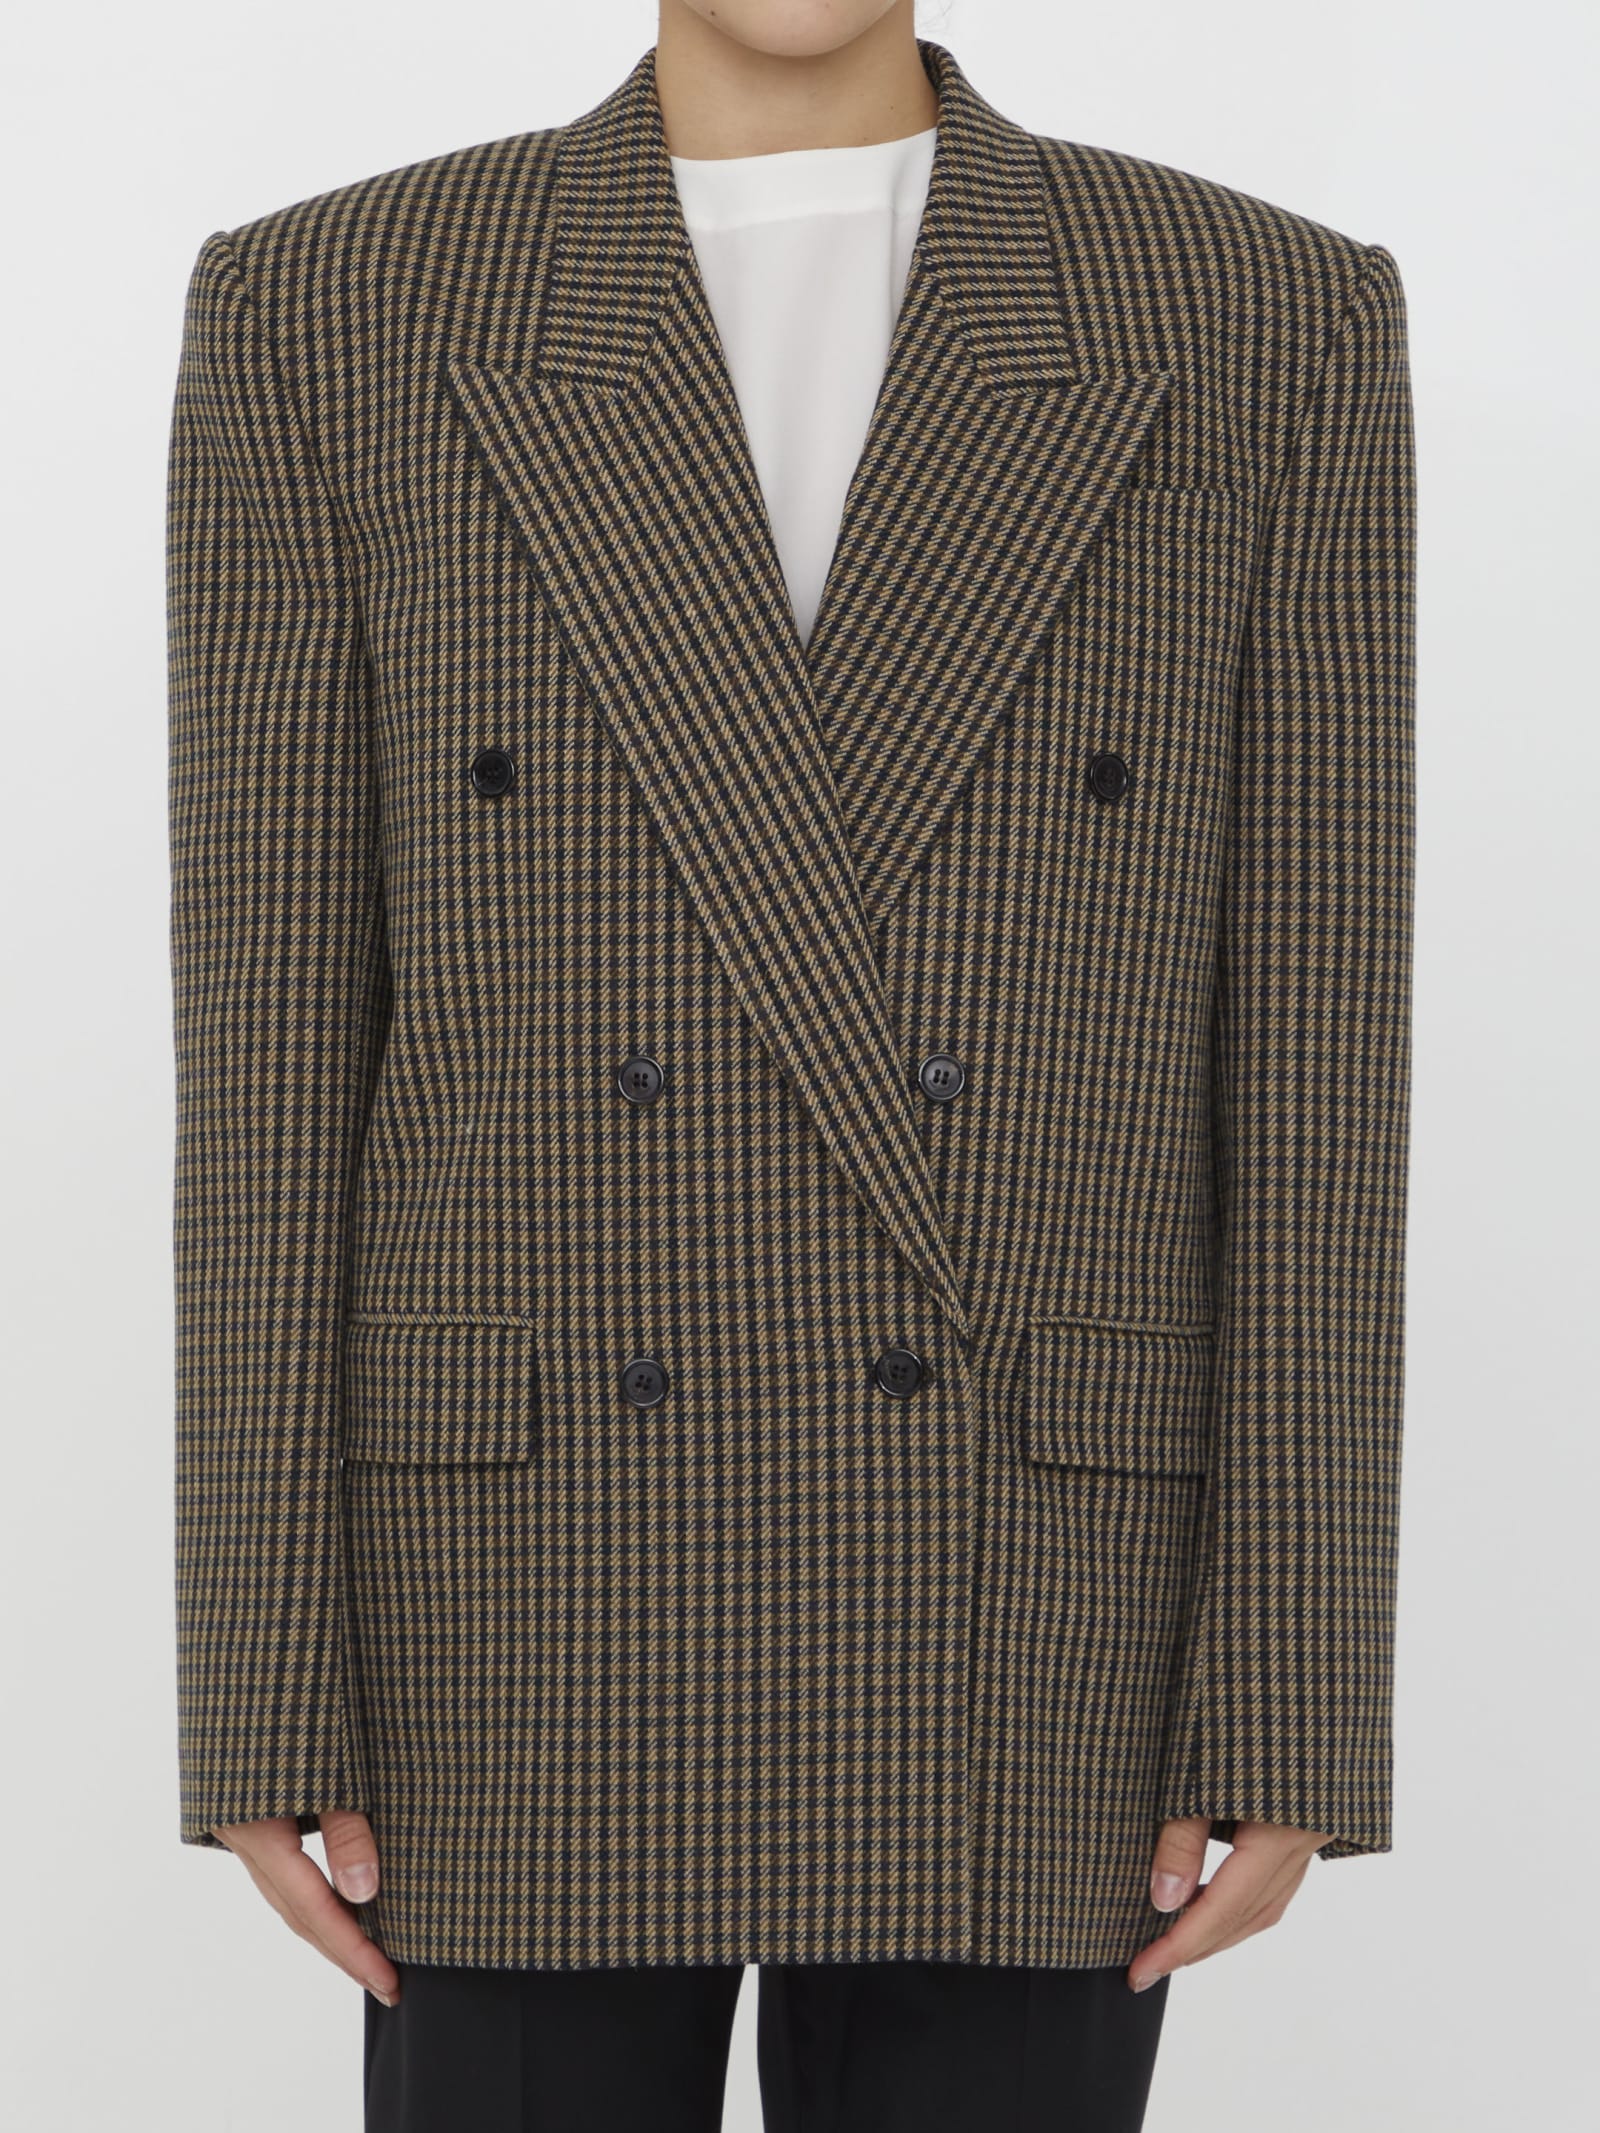 SAINT LAURENT DOUBLE-BREASTED JACKET IN WOOL BLEND